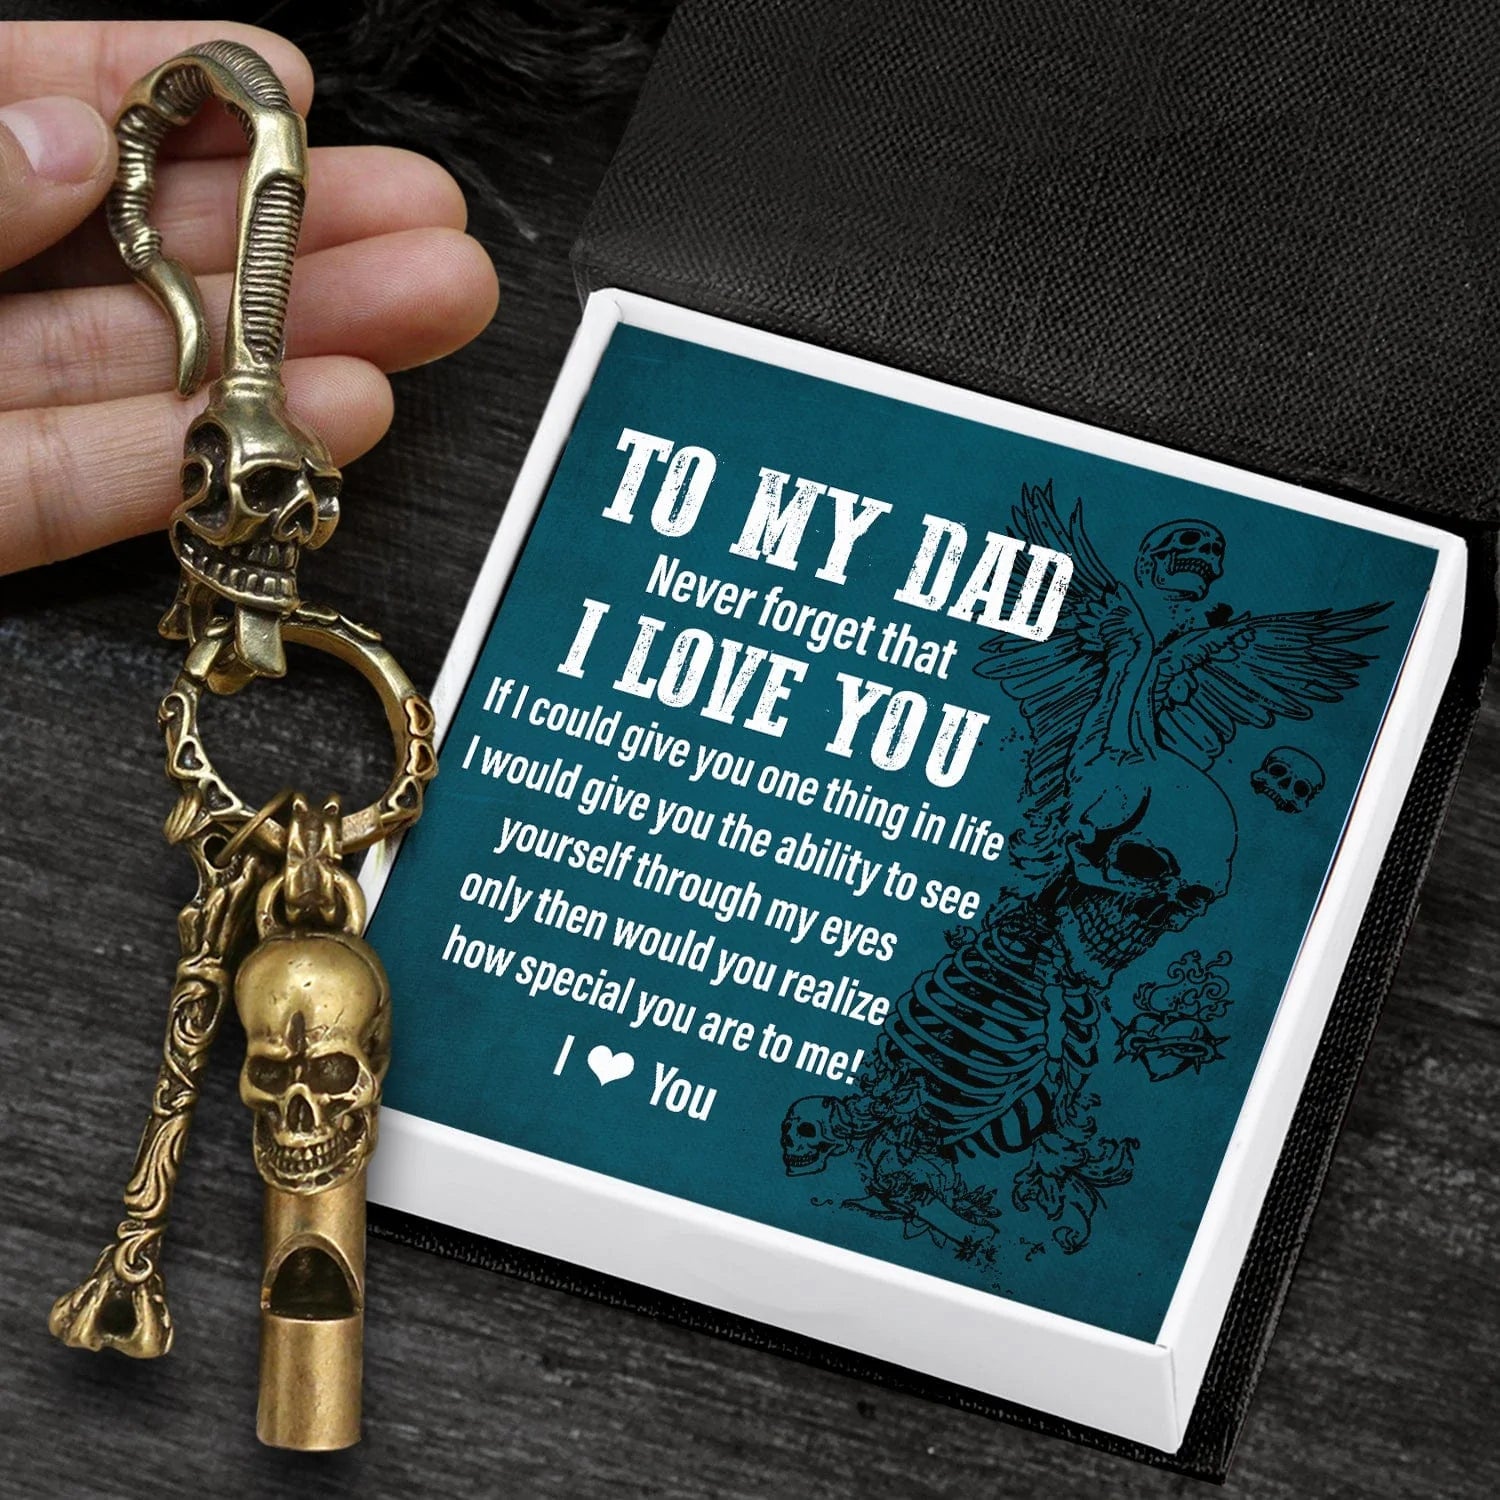 Wrapsify Skull Keychain Holder - Skull - to My Dad - Never Forget That I Love You - Gkci18028 Buy with Handmade Gift Box